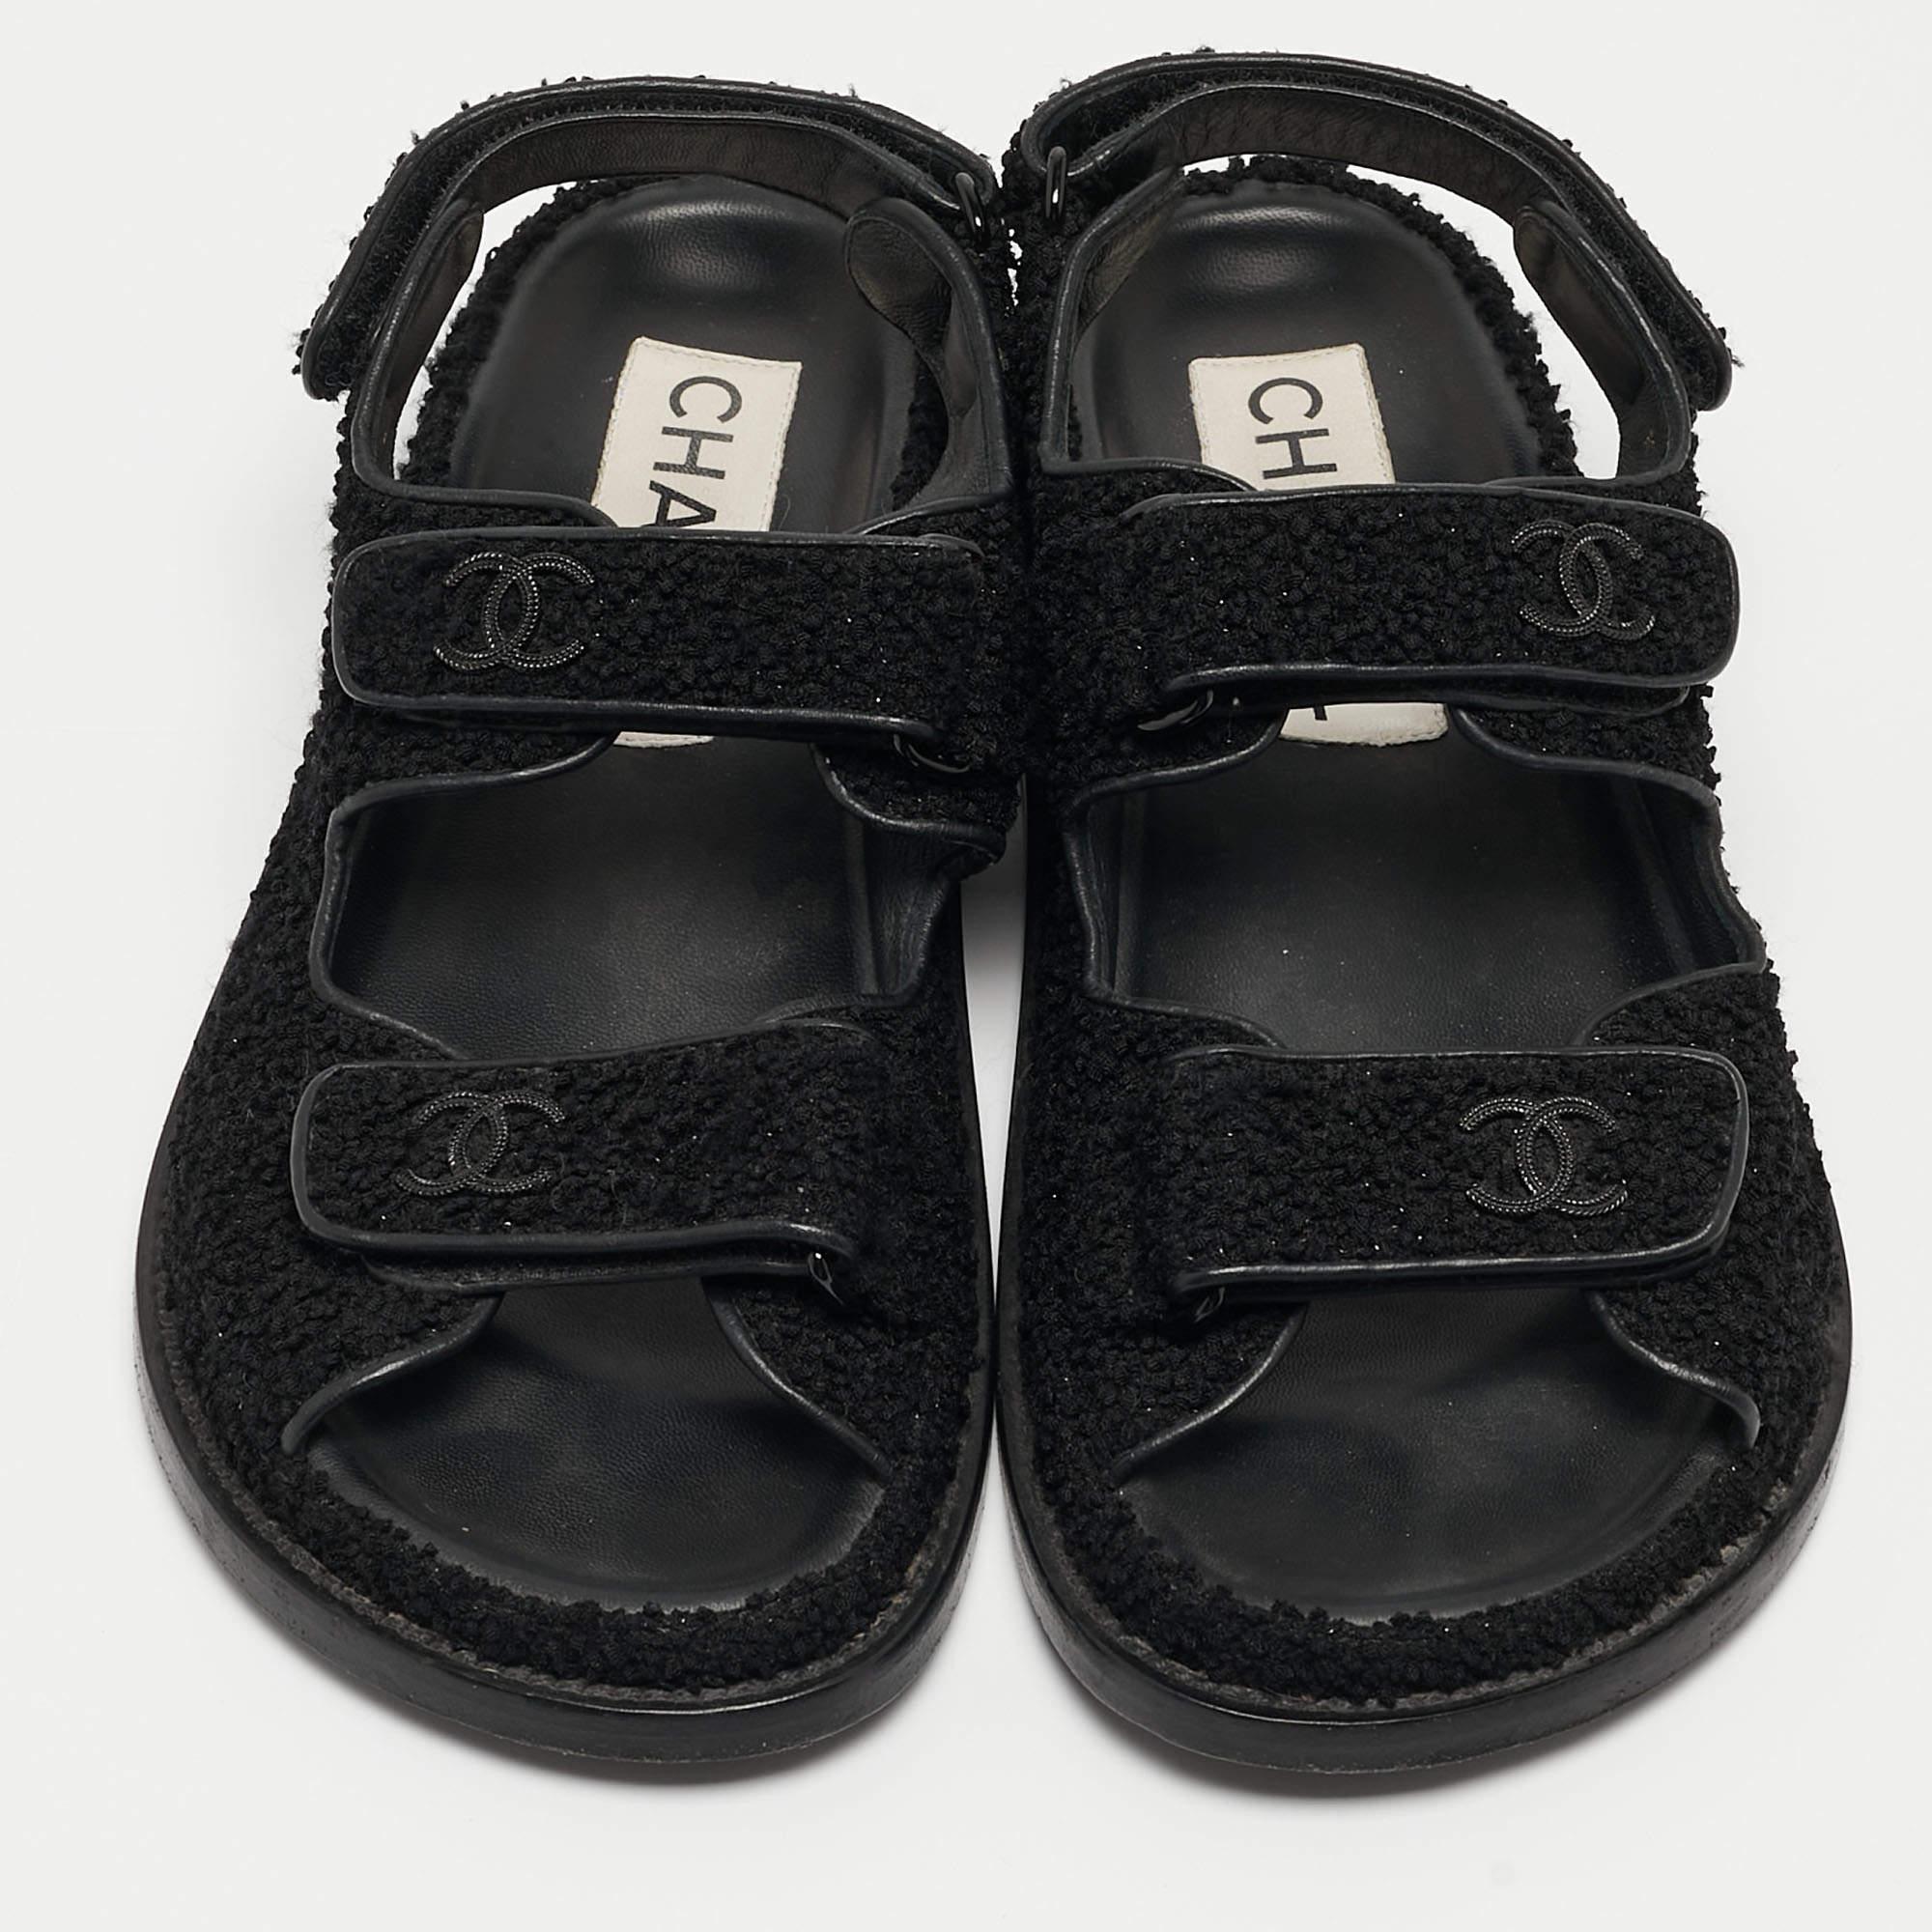 Complement your well-put-together outfit with these authentic Chanel dad sandals. Timeless and classy, they have an amazing construction for enduring quality and comfortable fit.

